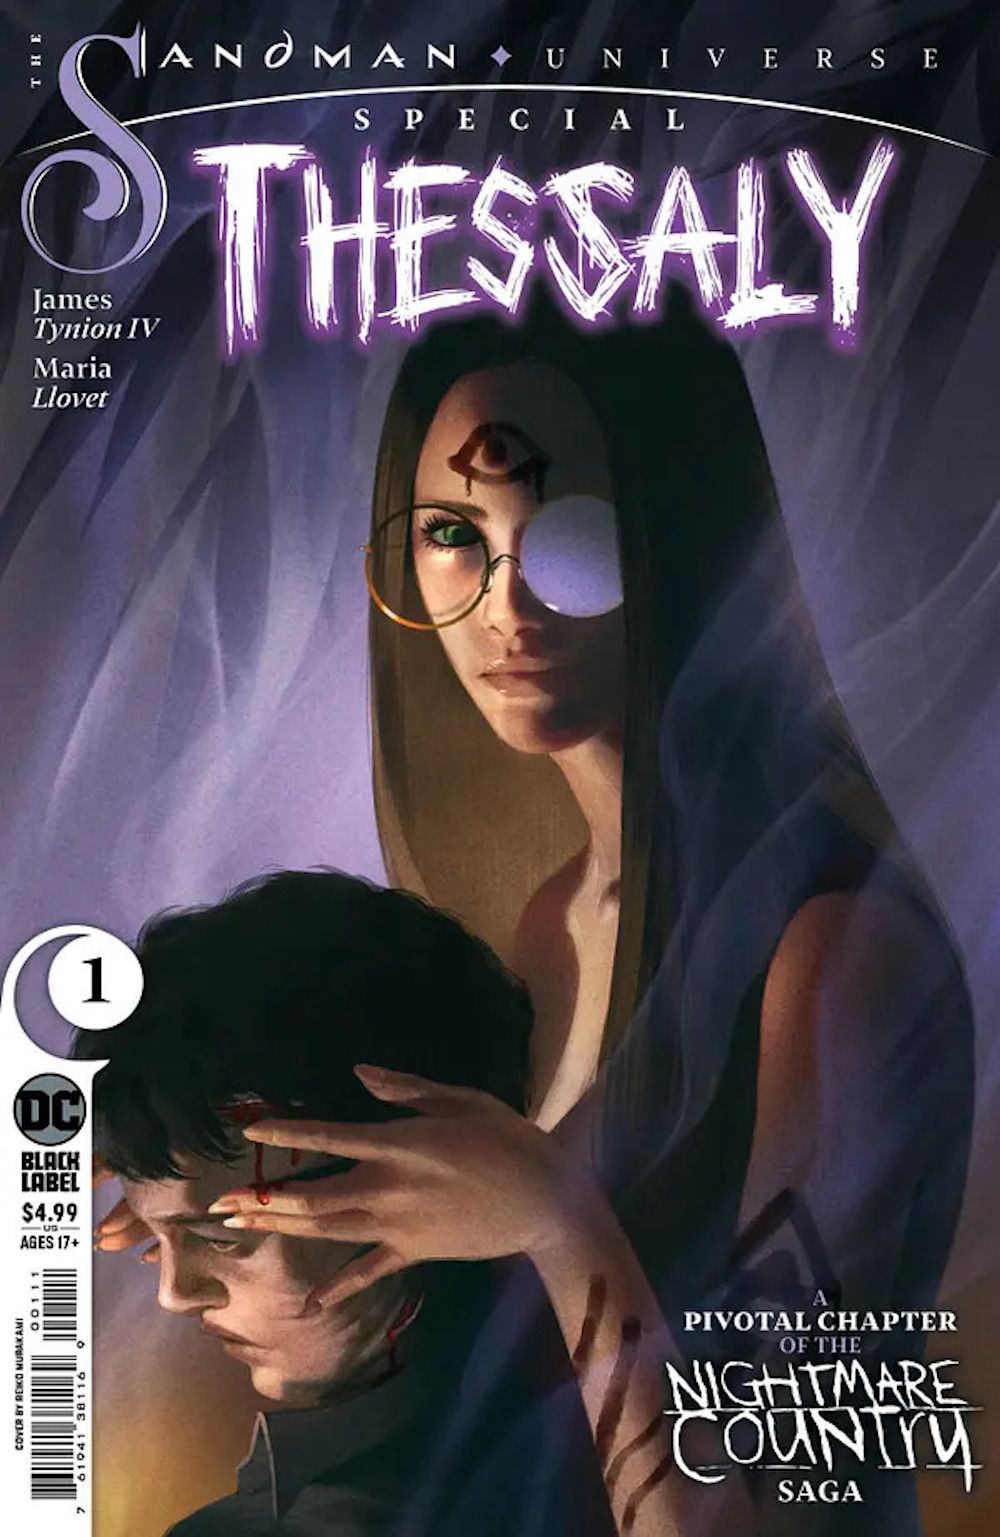 The Cover of Sandman Universe Special: Thessaly #1. Thessaly holds her latest victim by their head.